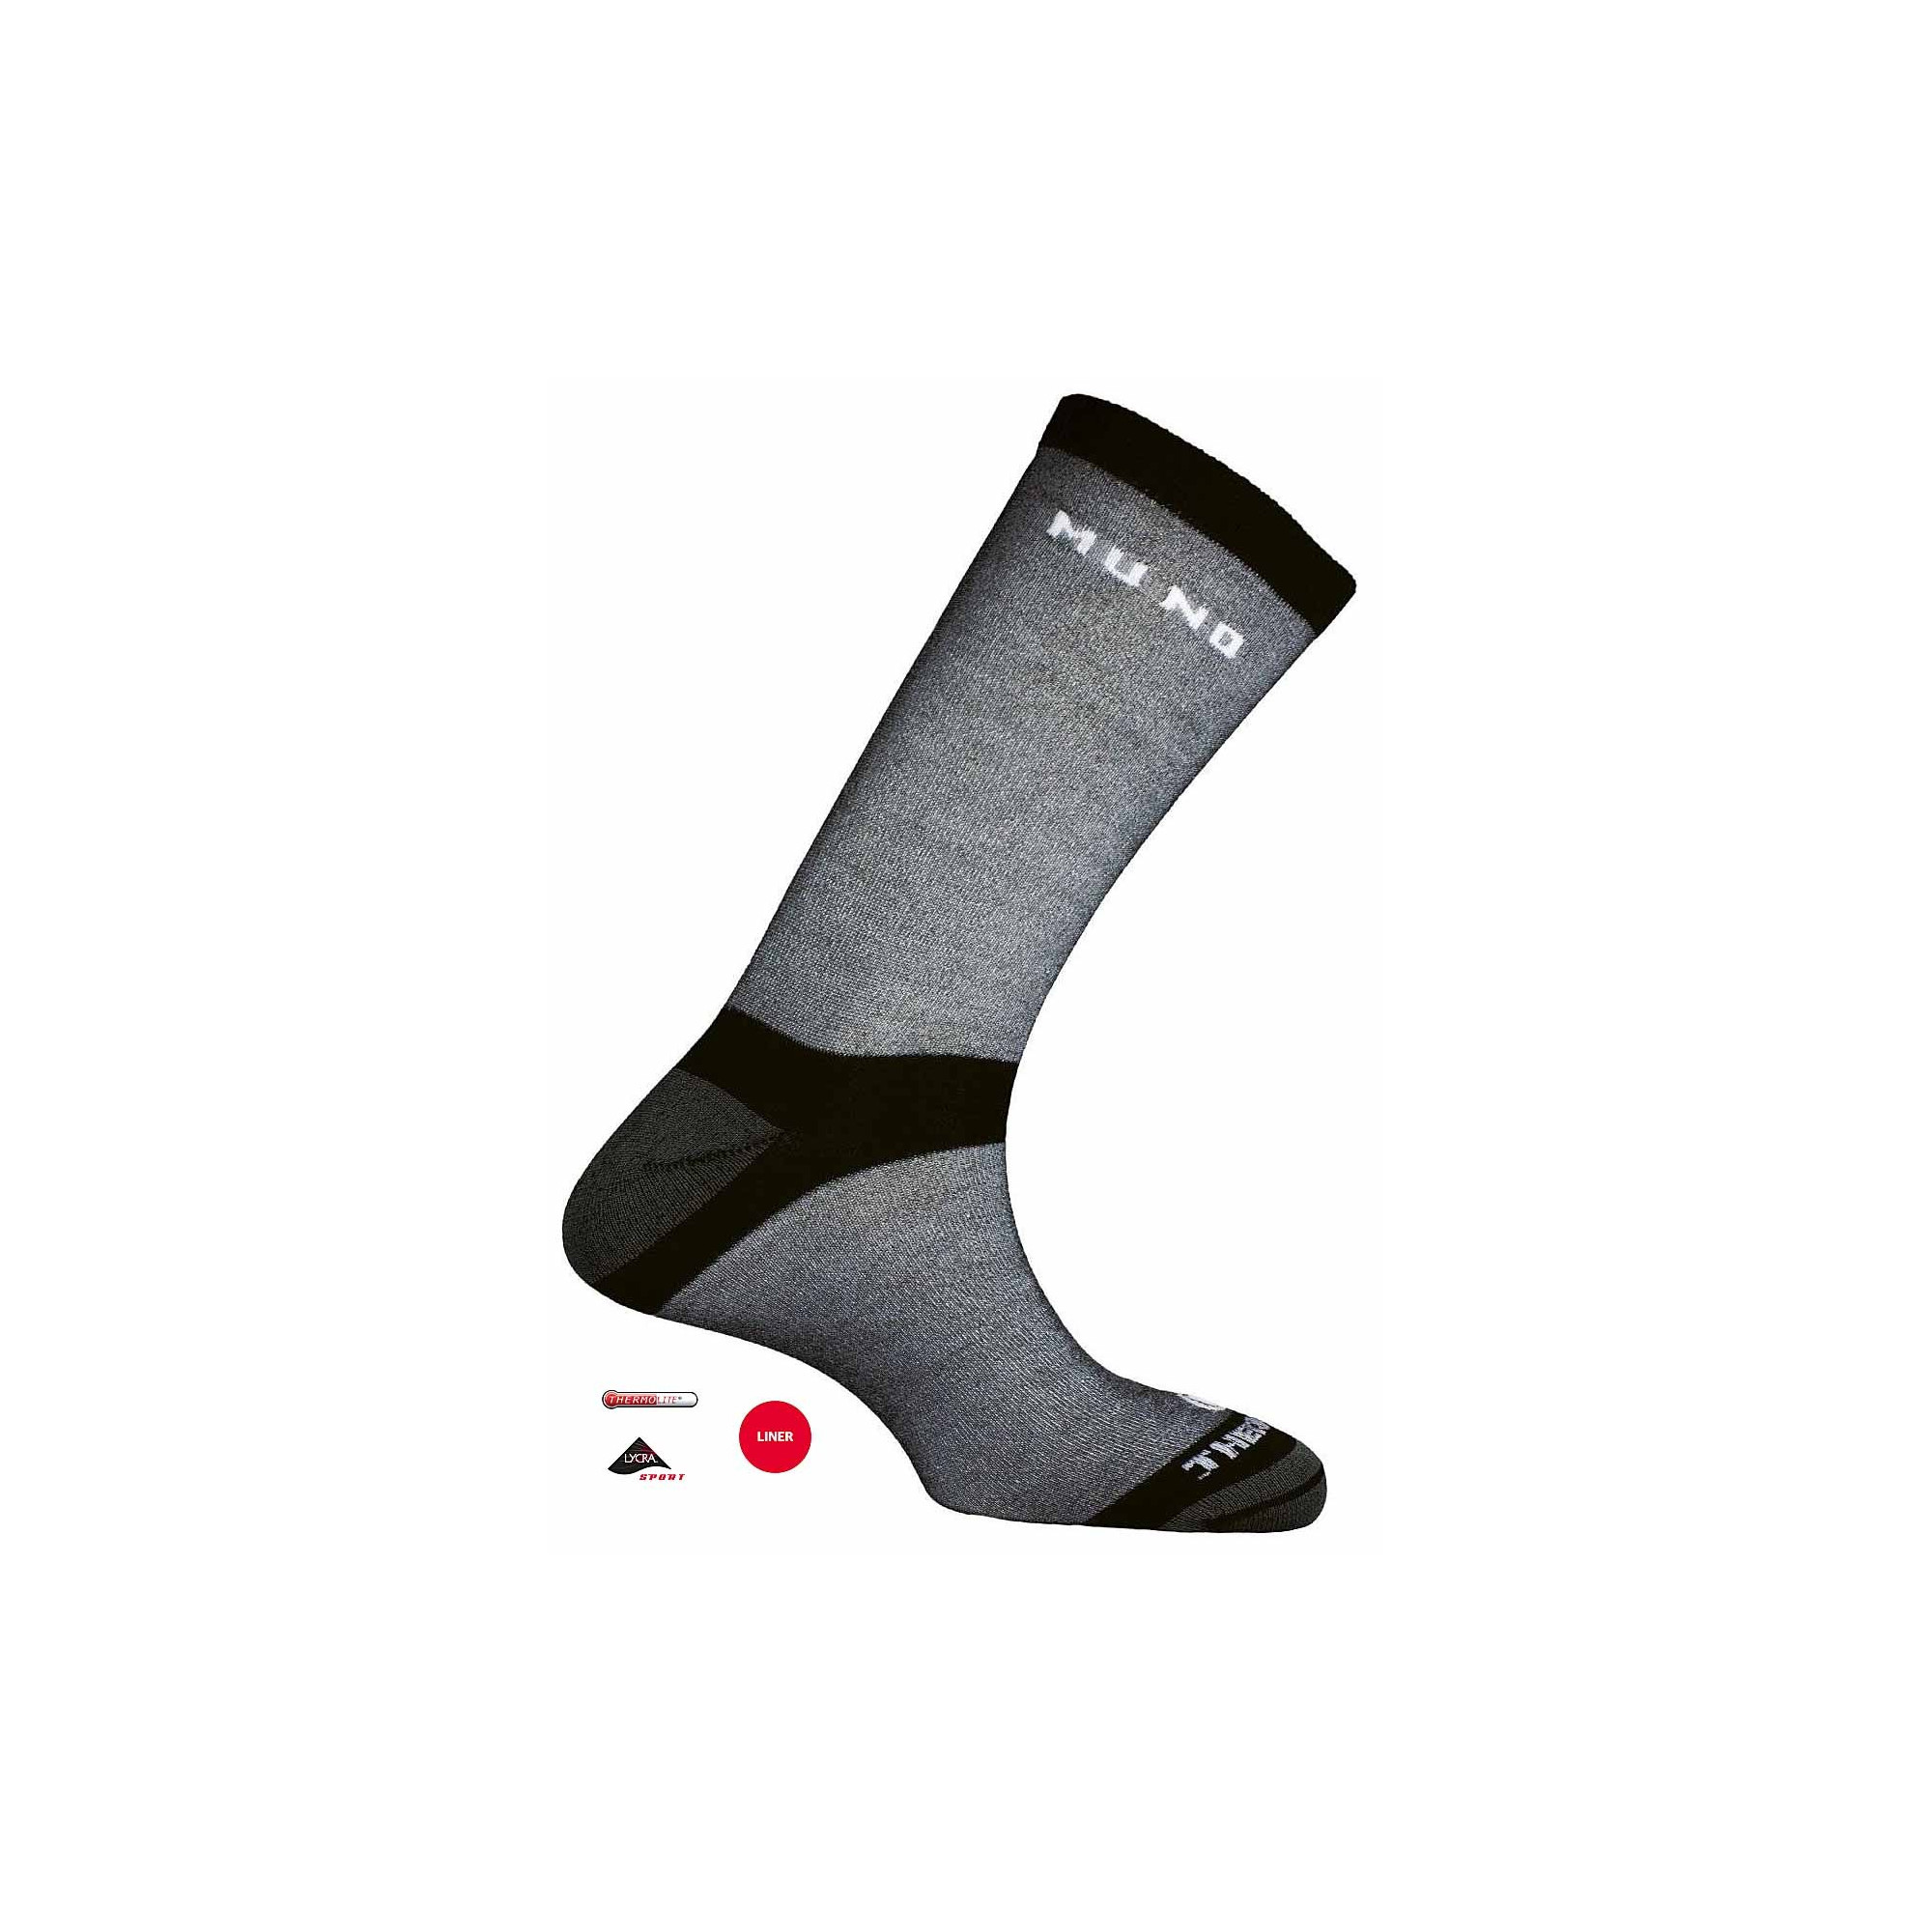 https://www.inuka.com/19965-zoom_product/chaussettes-hiver-elbrus.jpg